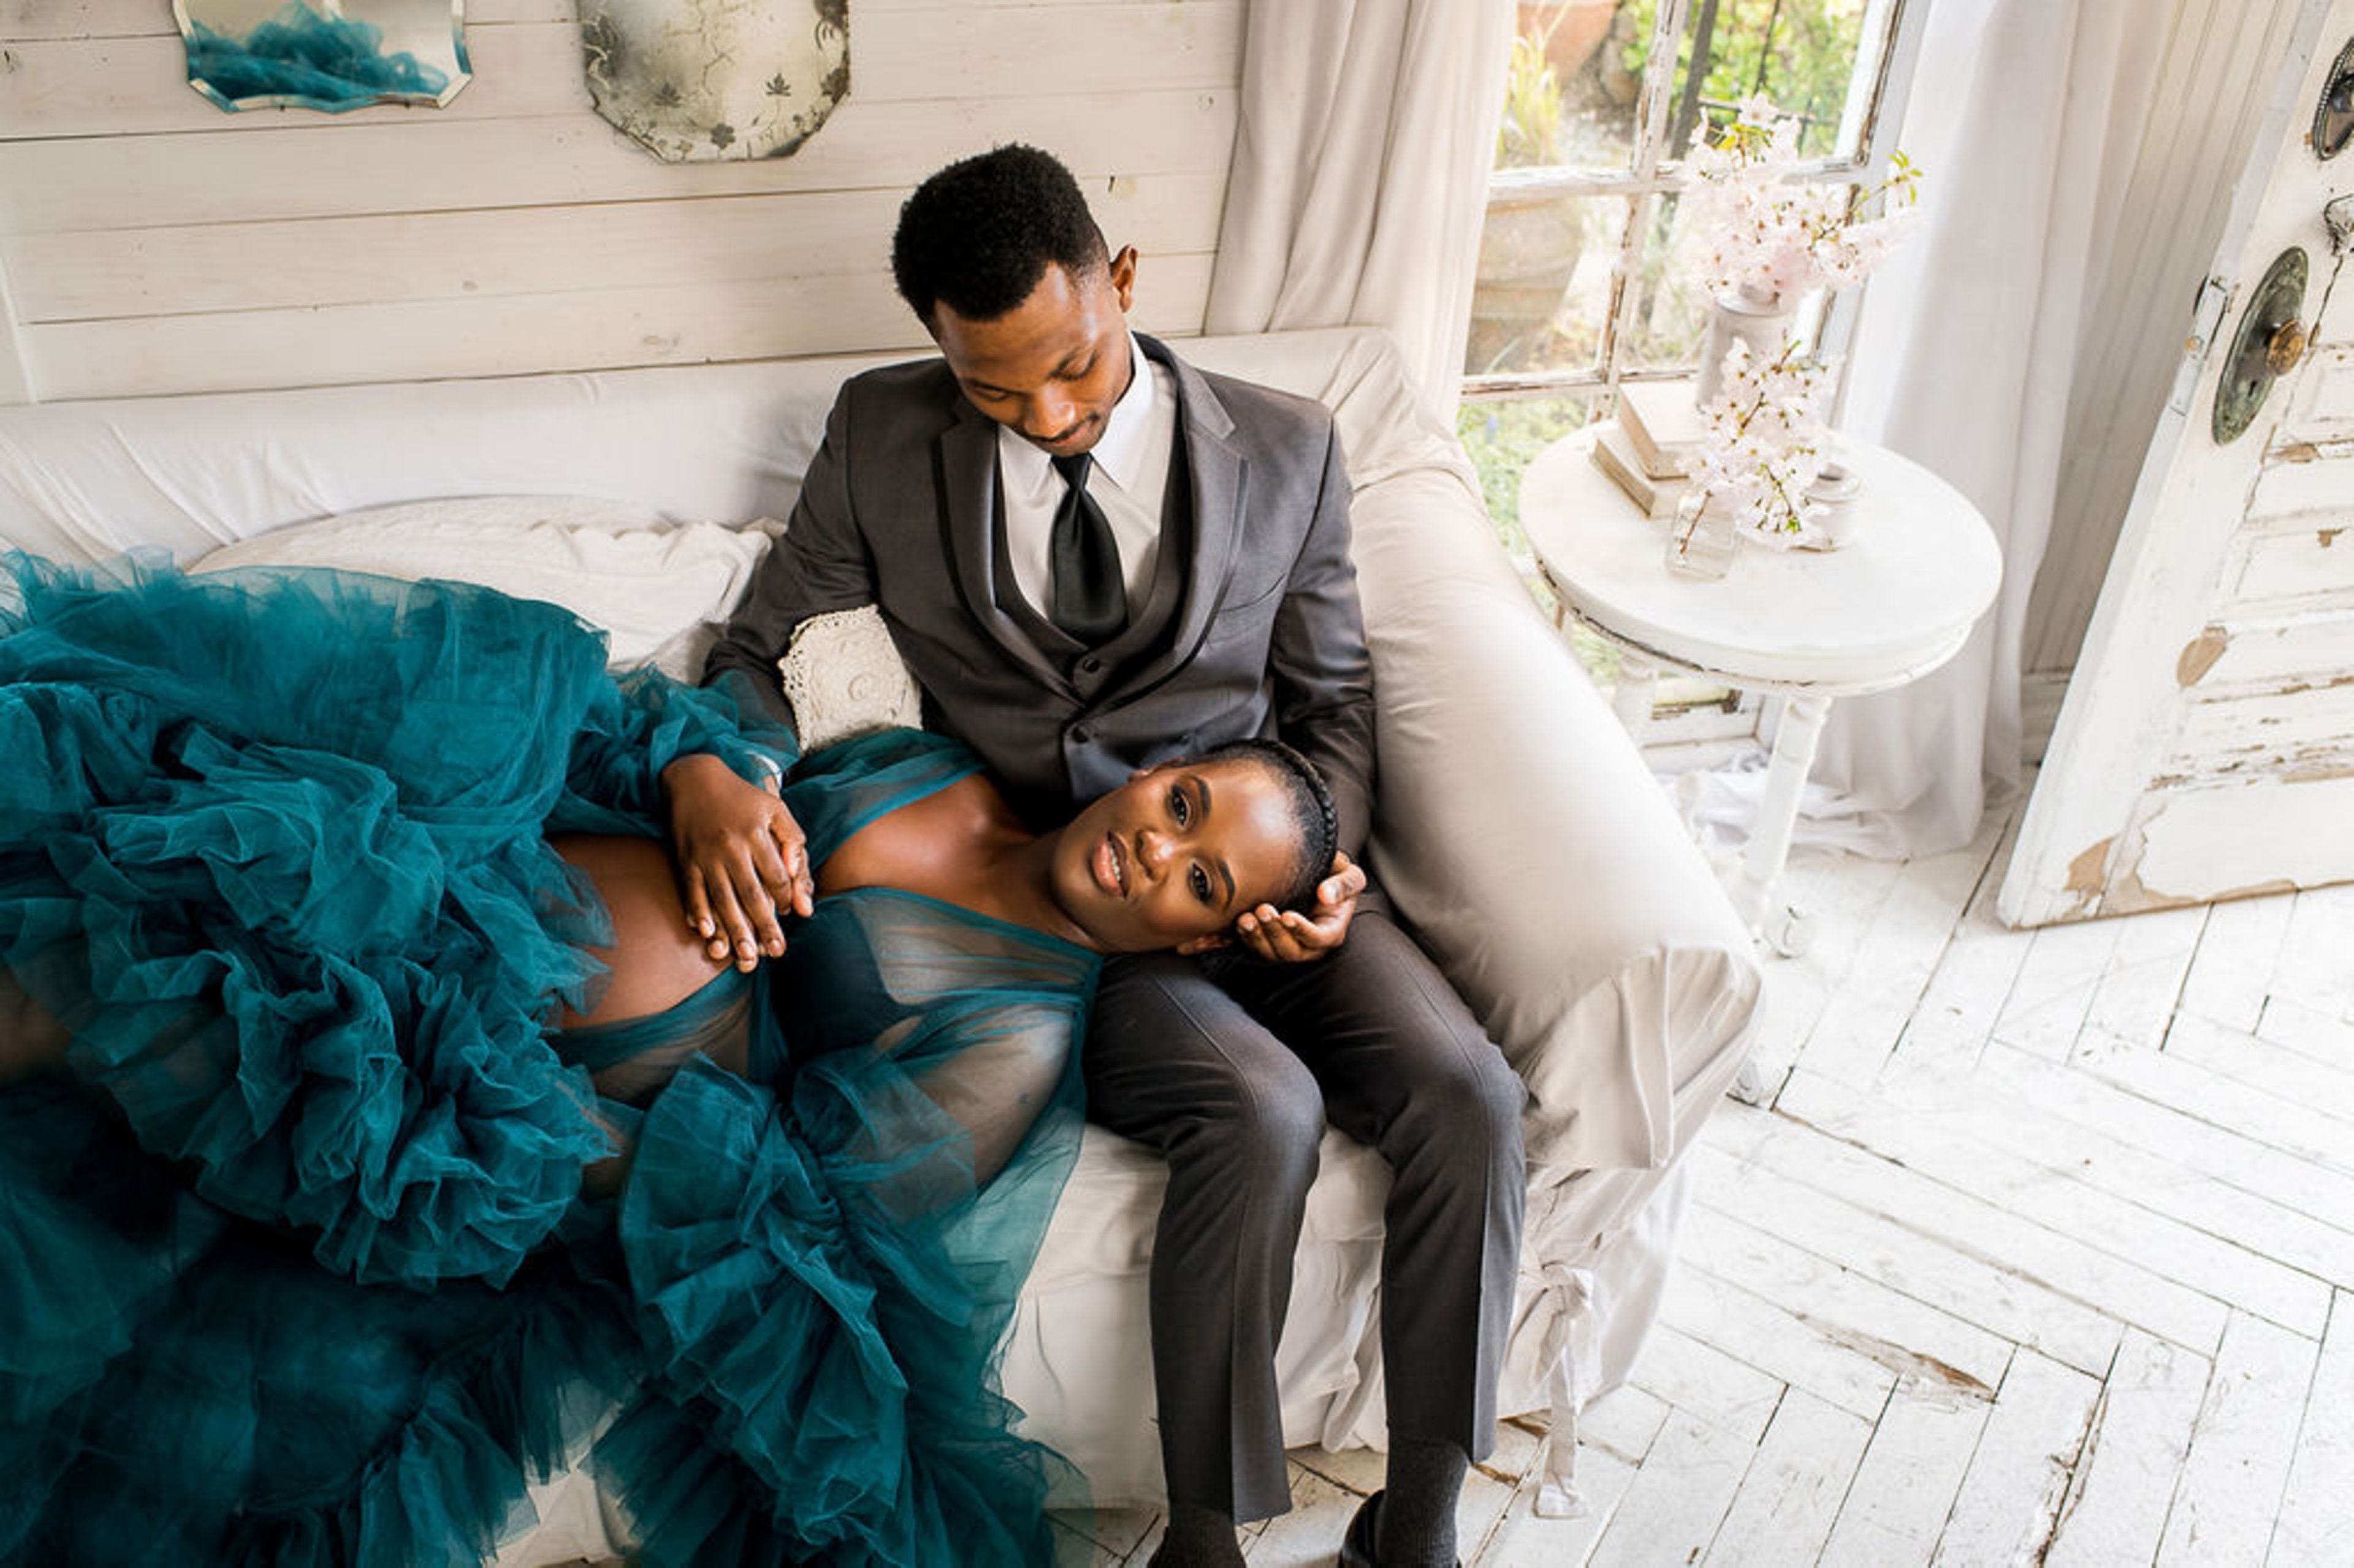 A maternity photoshoot of a man and a woman sitting on a rustic couch surrounded by blue and white accents.